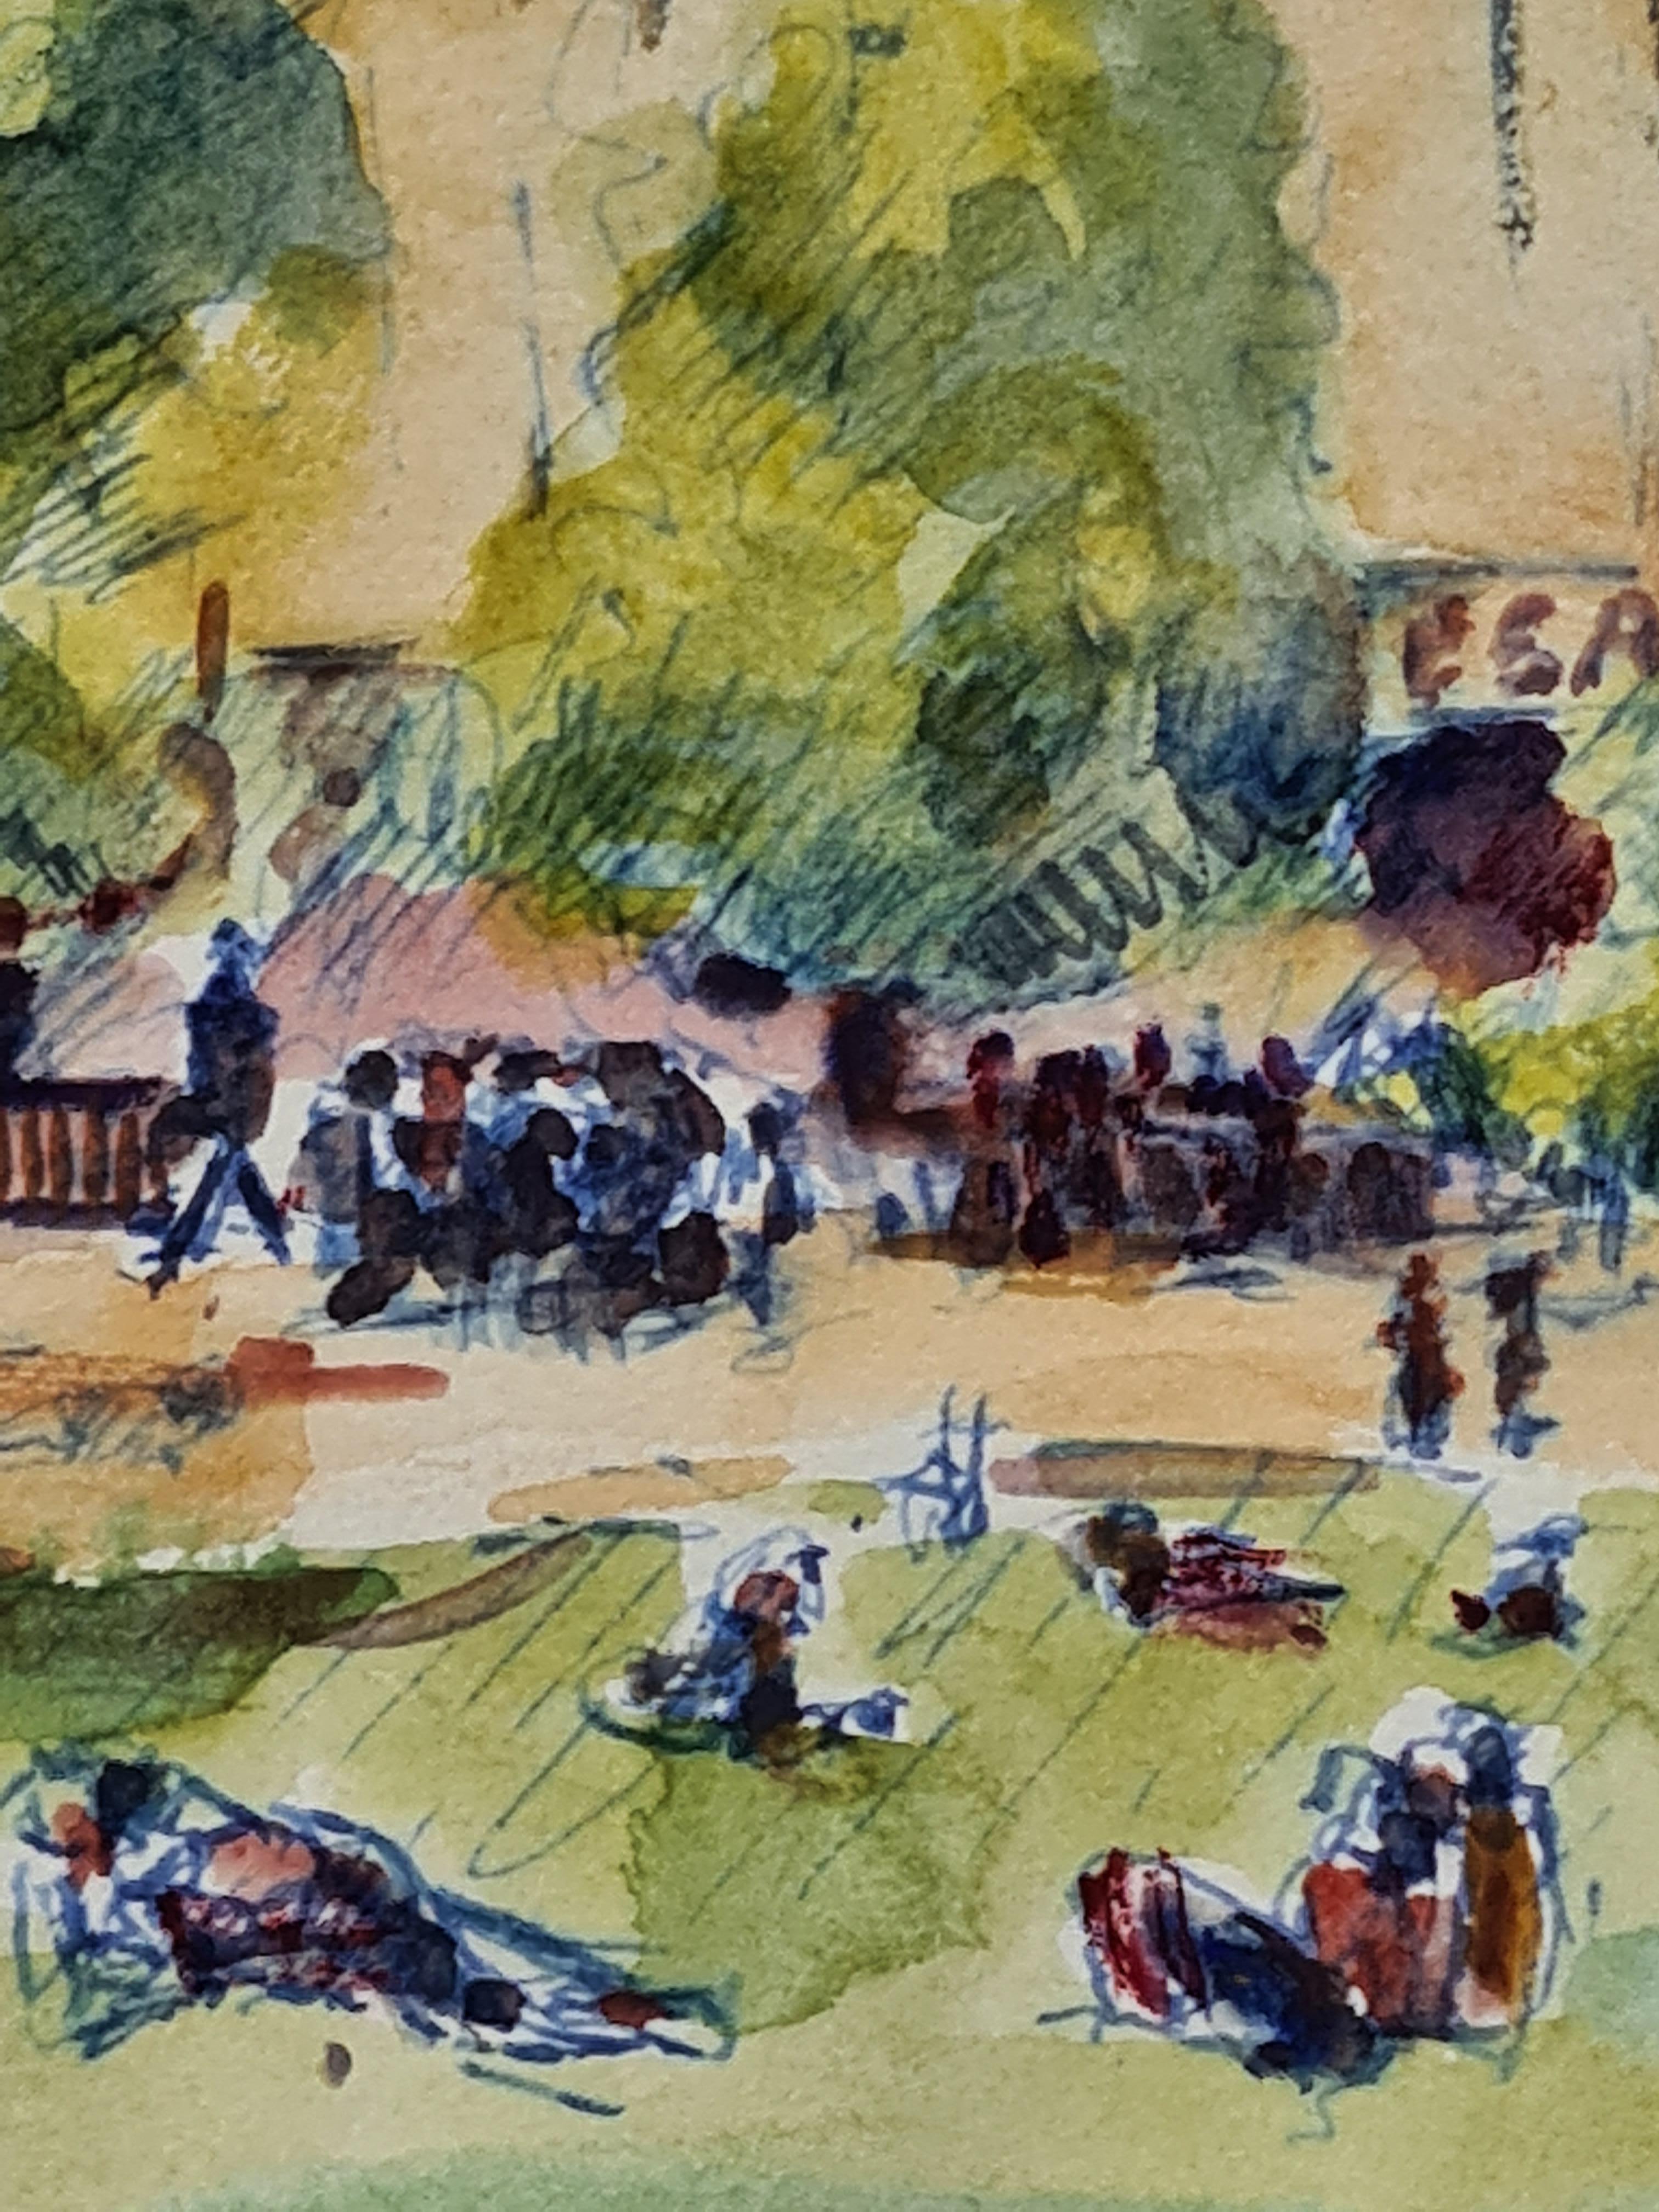 French watercolour on paper view of a park in front of an Odeon cinema by Henri Clamen. Though not signed the painting was acquired from the atelier of the artist with other signed works.

A charming view of people enjoying a summer's day in a park